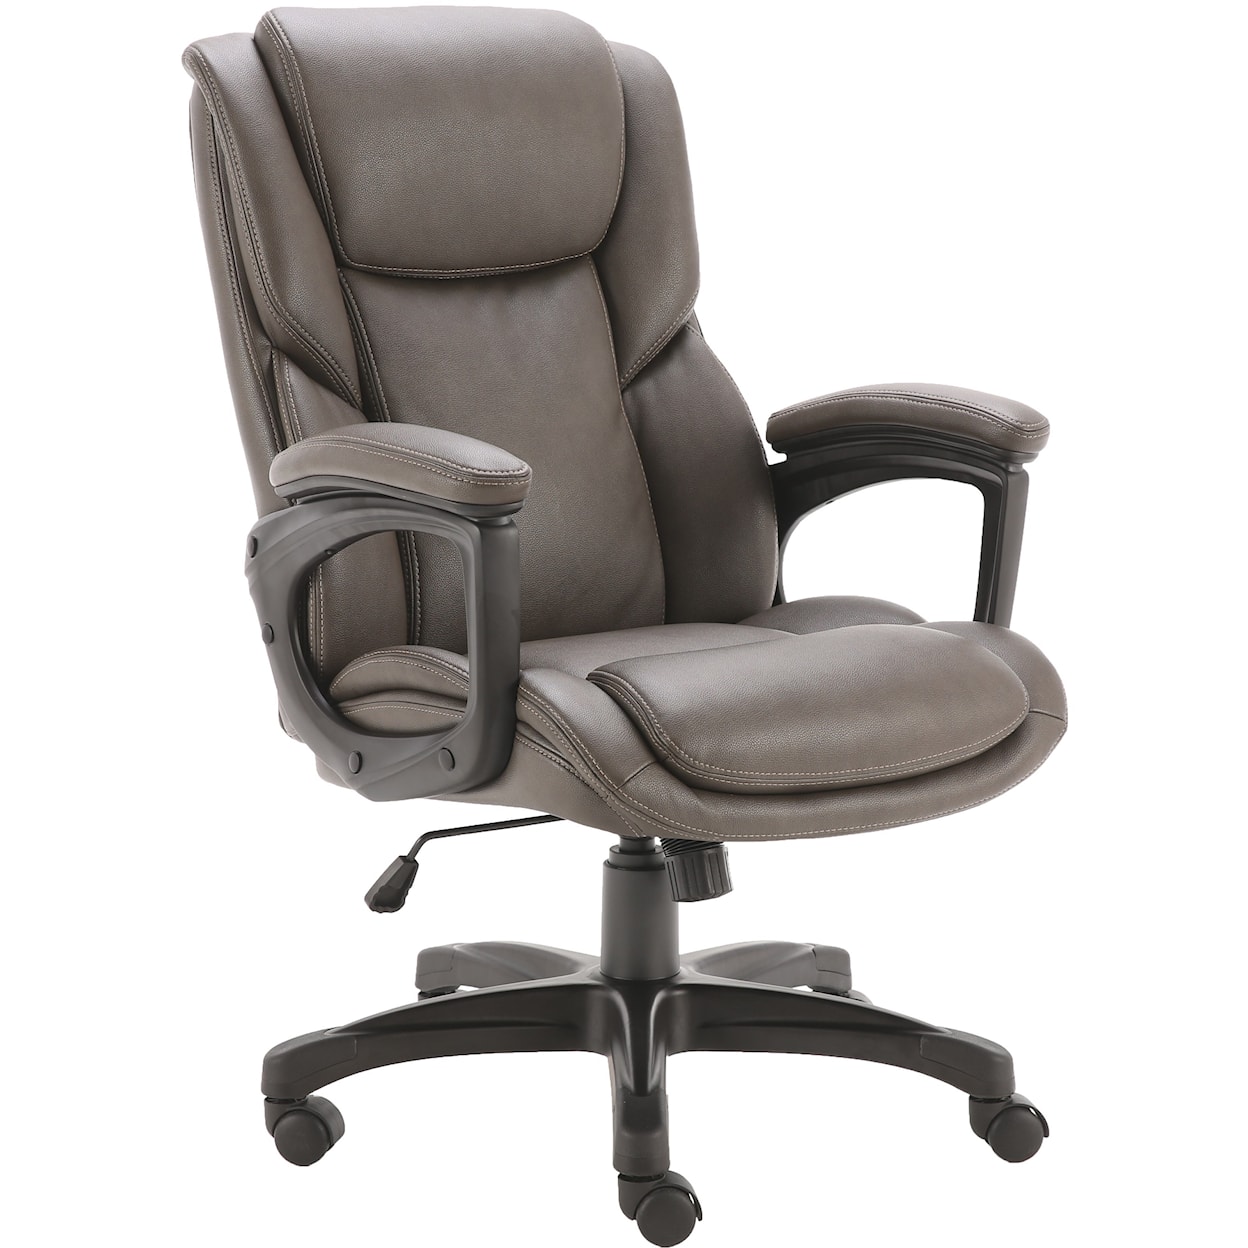 Paramount Living Desk Chairs Desk Chair